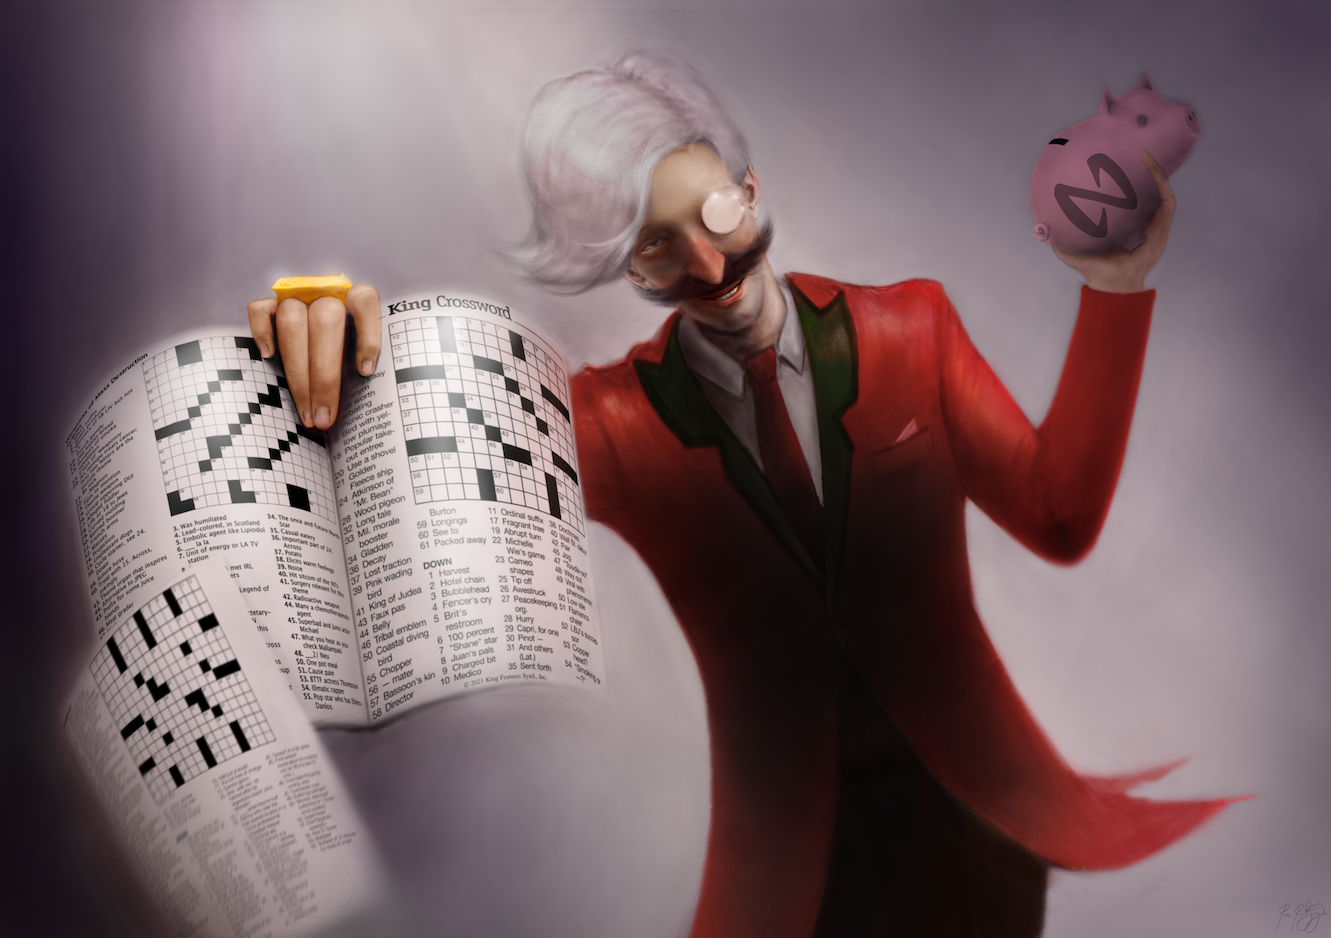 Man holding a book full of crossword puzzles, in his other hand he's holding a piggy bank. Art created by r3v.near